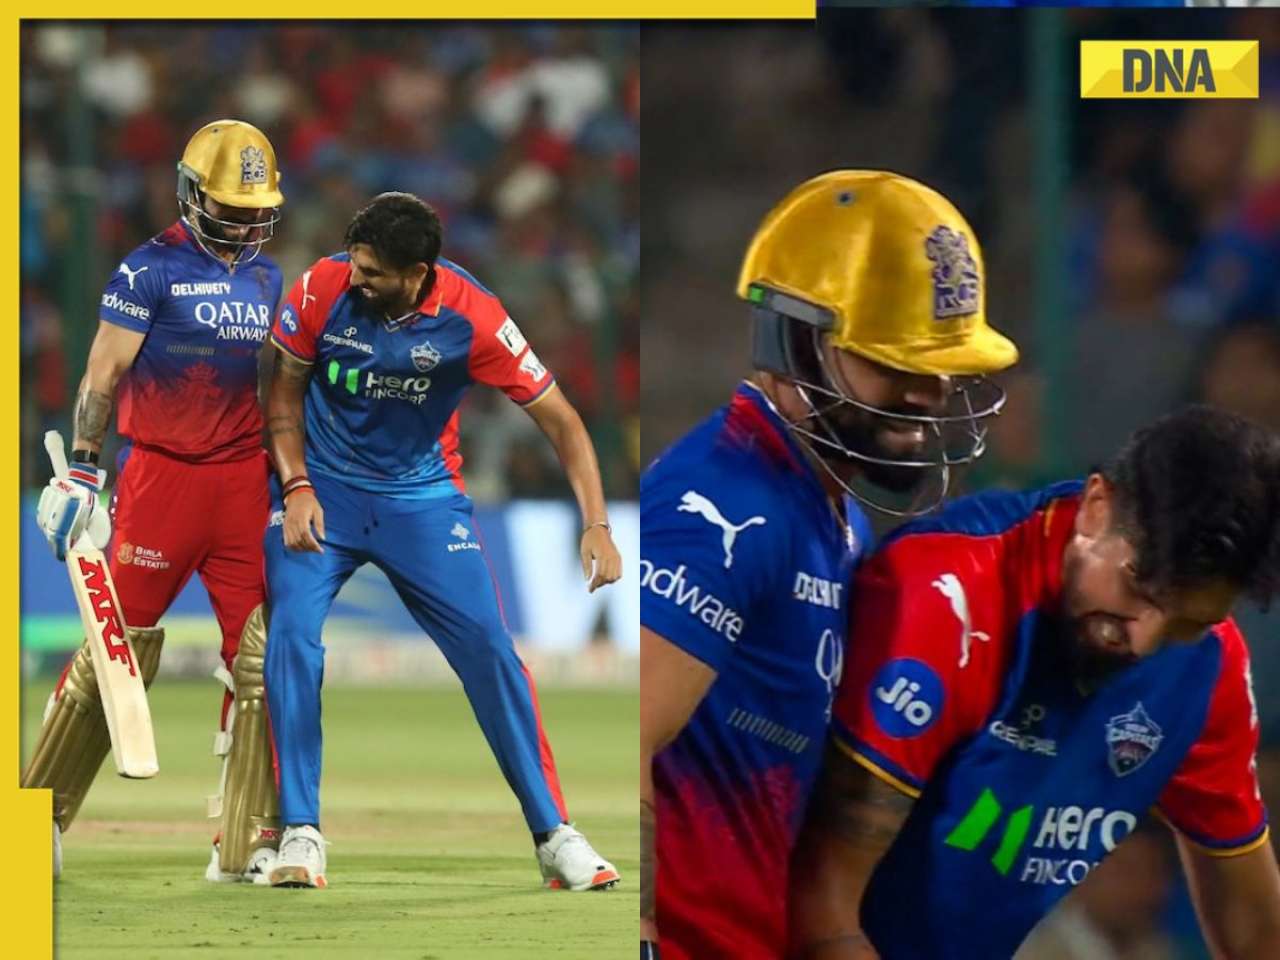 Watch: Ishant Sharma gives Virat Kohli fiery send-off after taking his wicket during RCB vs DC IPL 2024 match